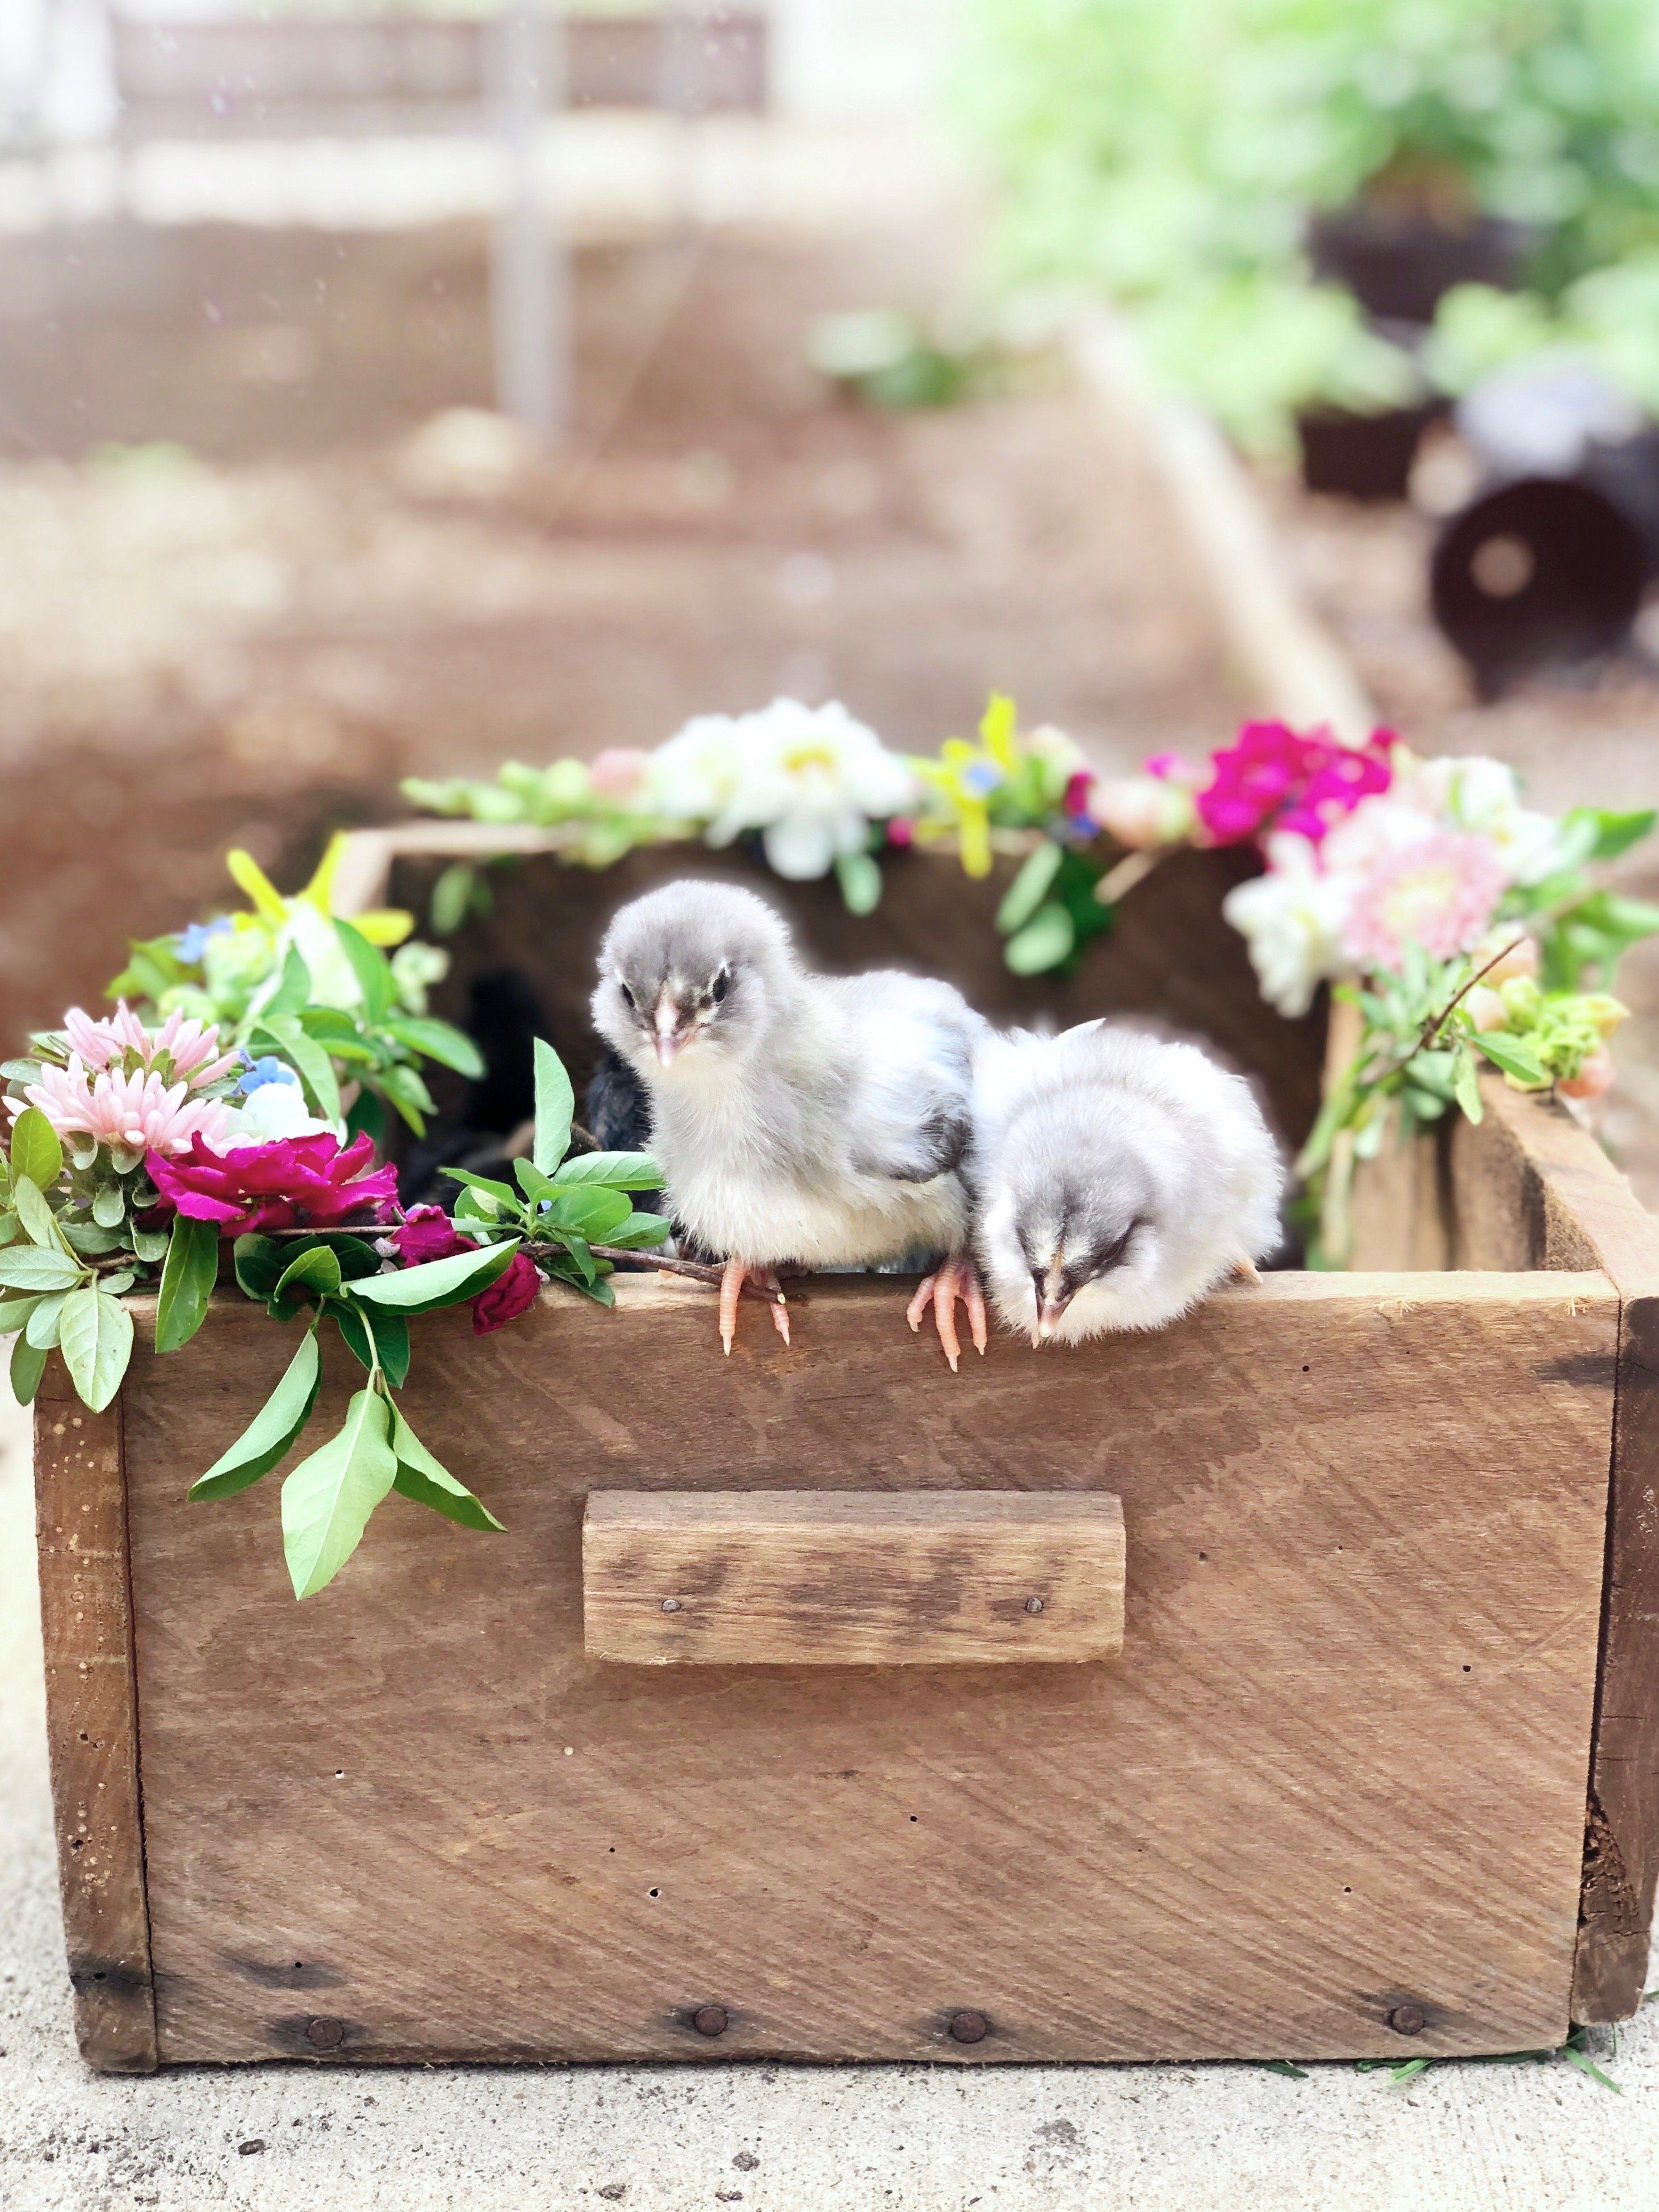 Next Happening: New chicks coming to the farm!